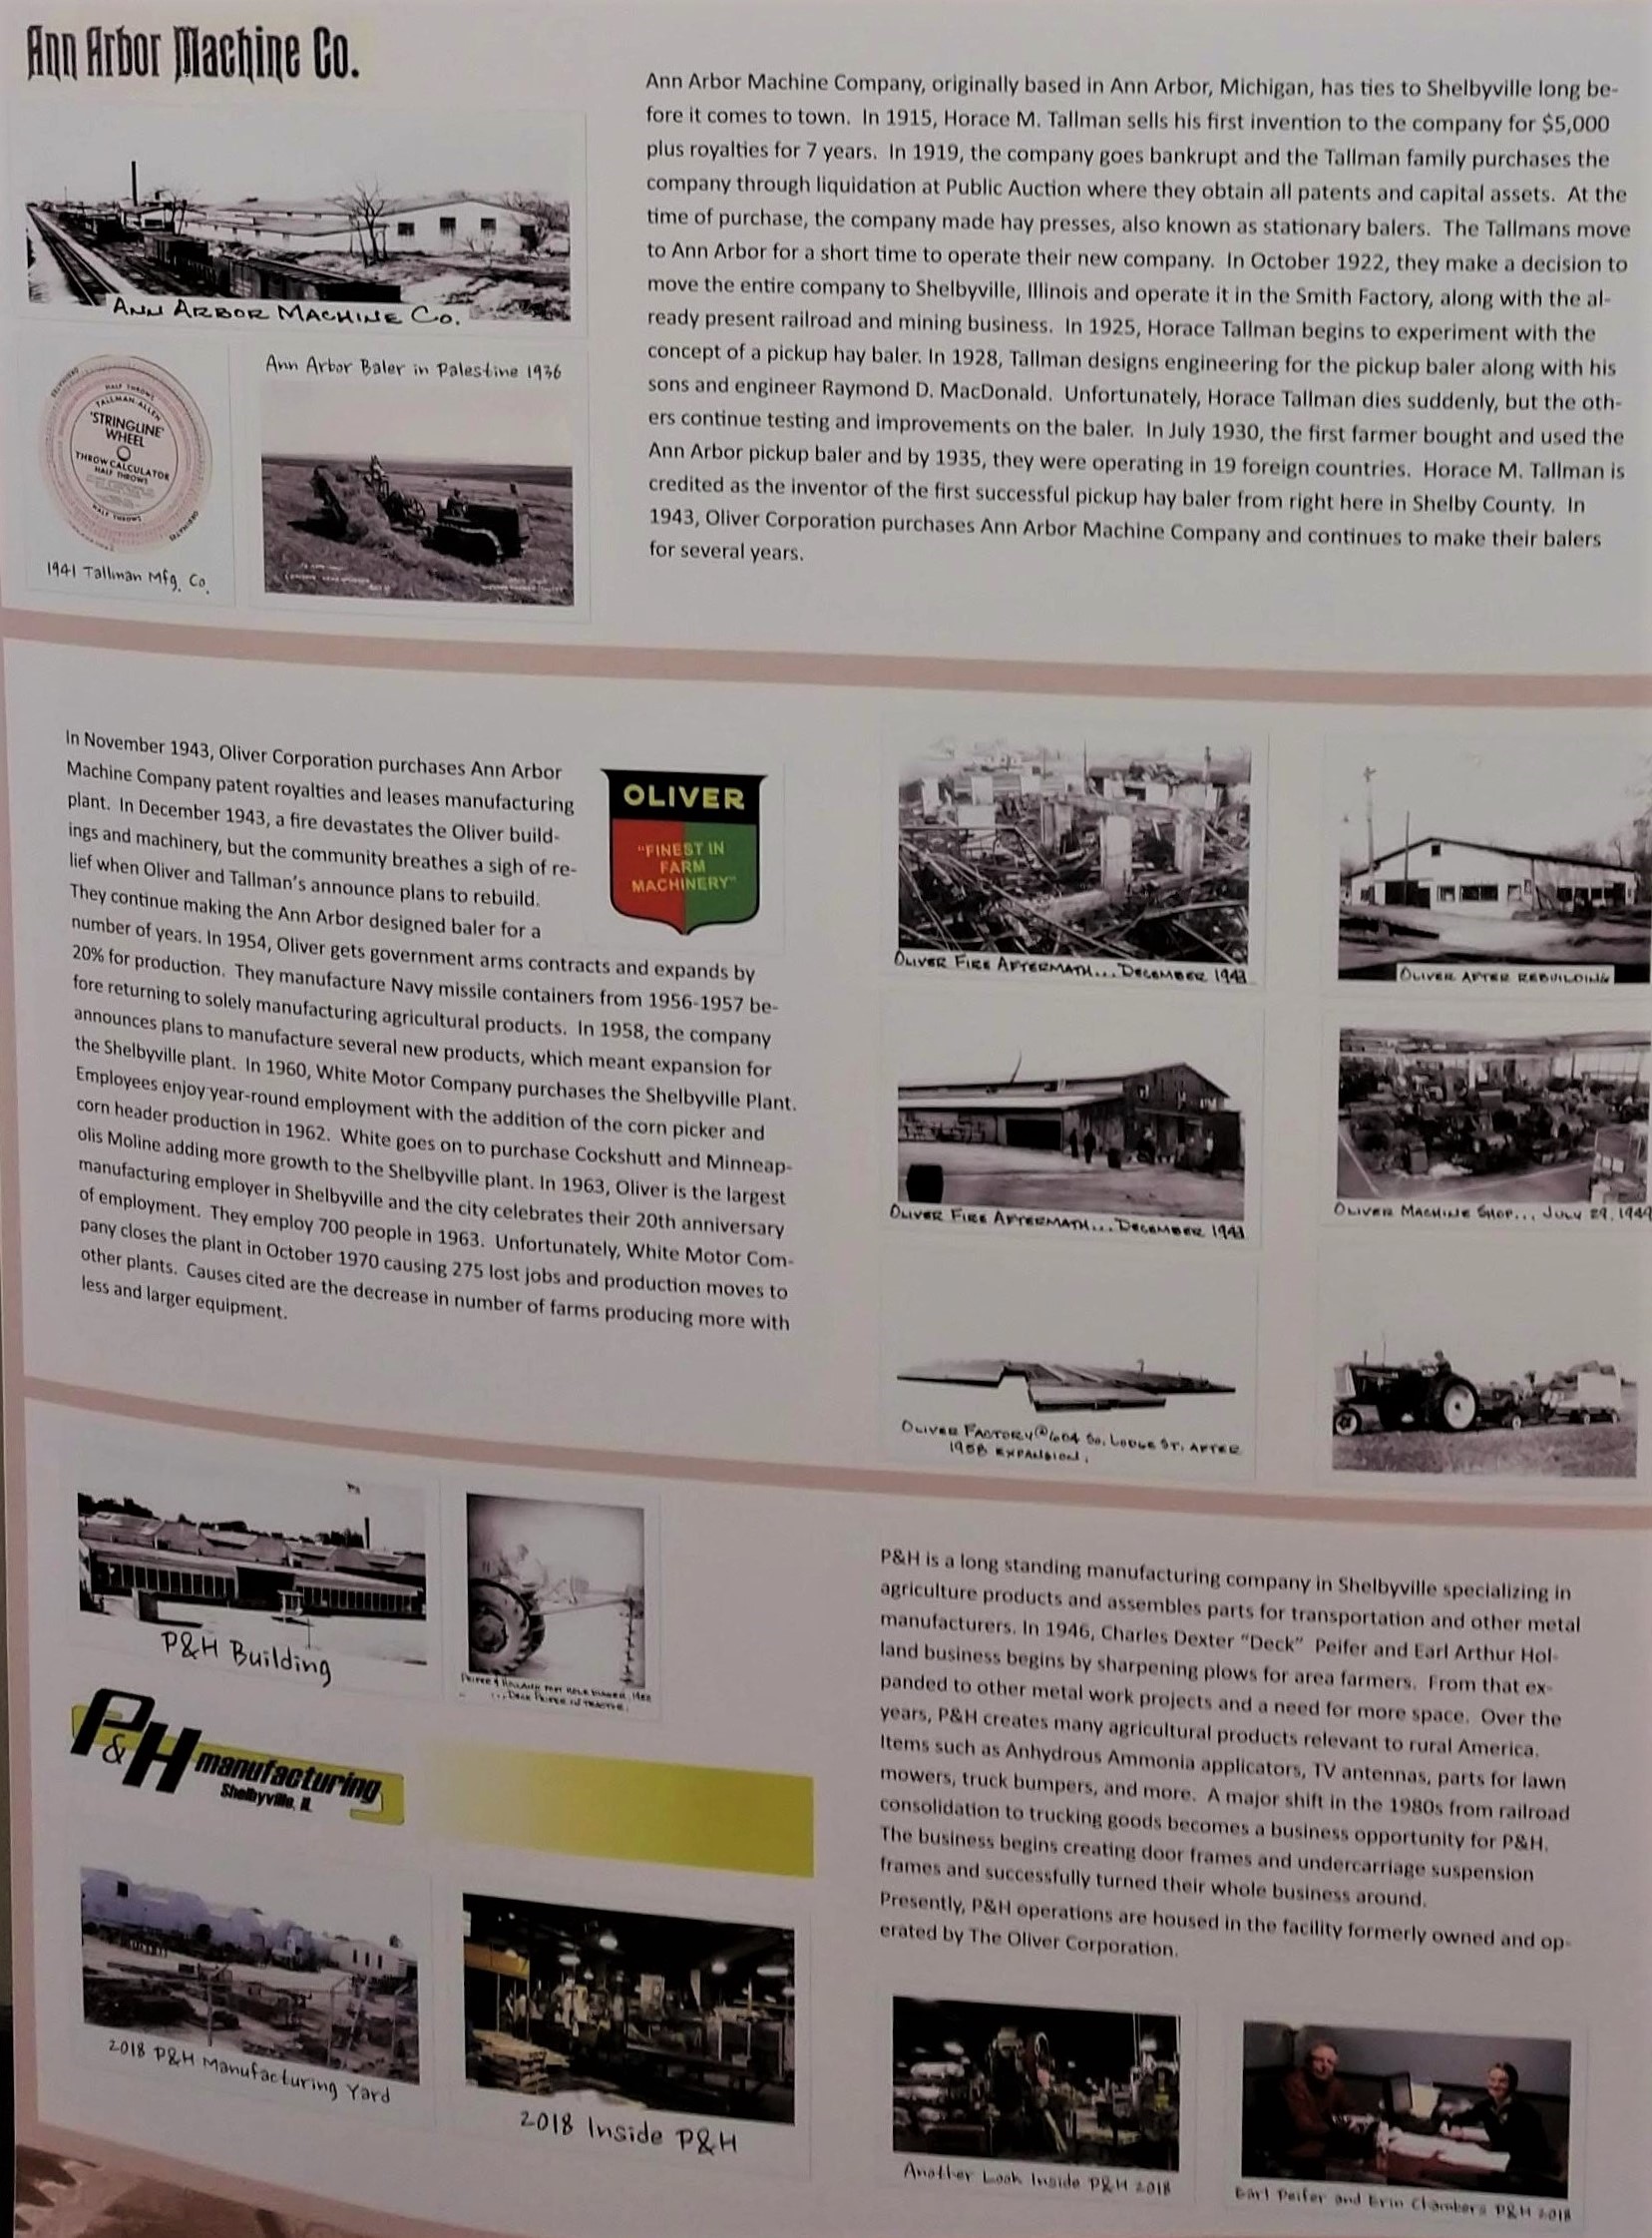 Photograph of a portion of Lake Shelbyville’s companion exhibition discussing the Ann Arbor Machine Company, the Oliver Corporation, and P & H Manufacturing.